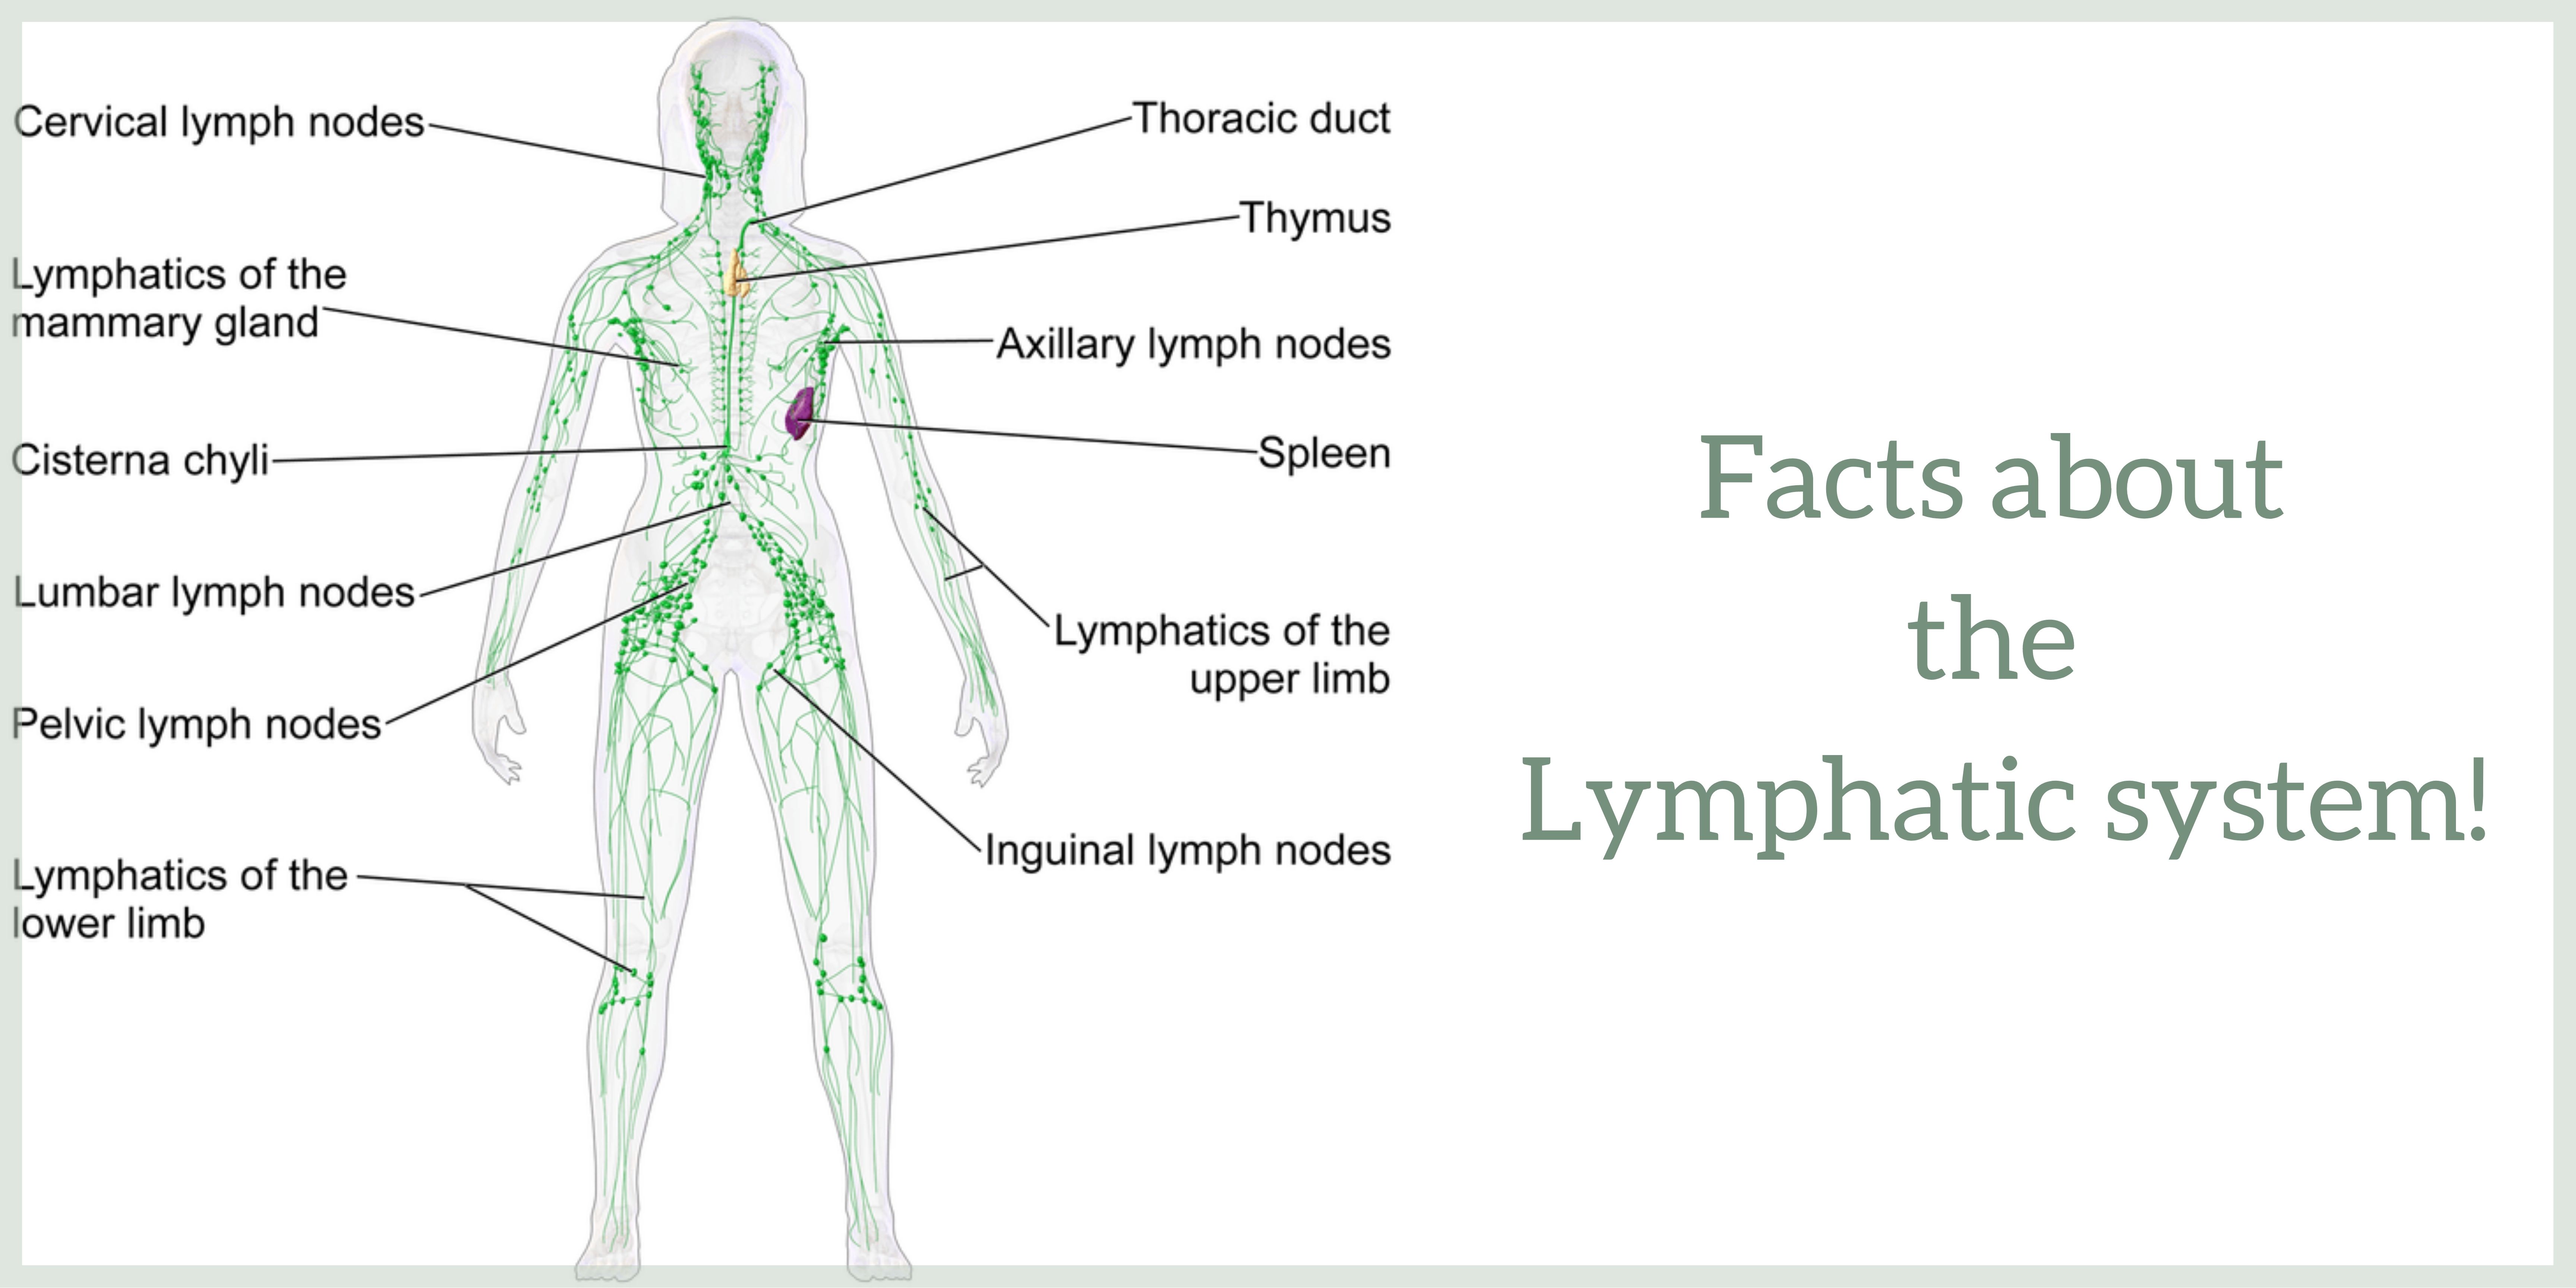 Facts about the Lymphatic system!+the functions of the lymphatic system